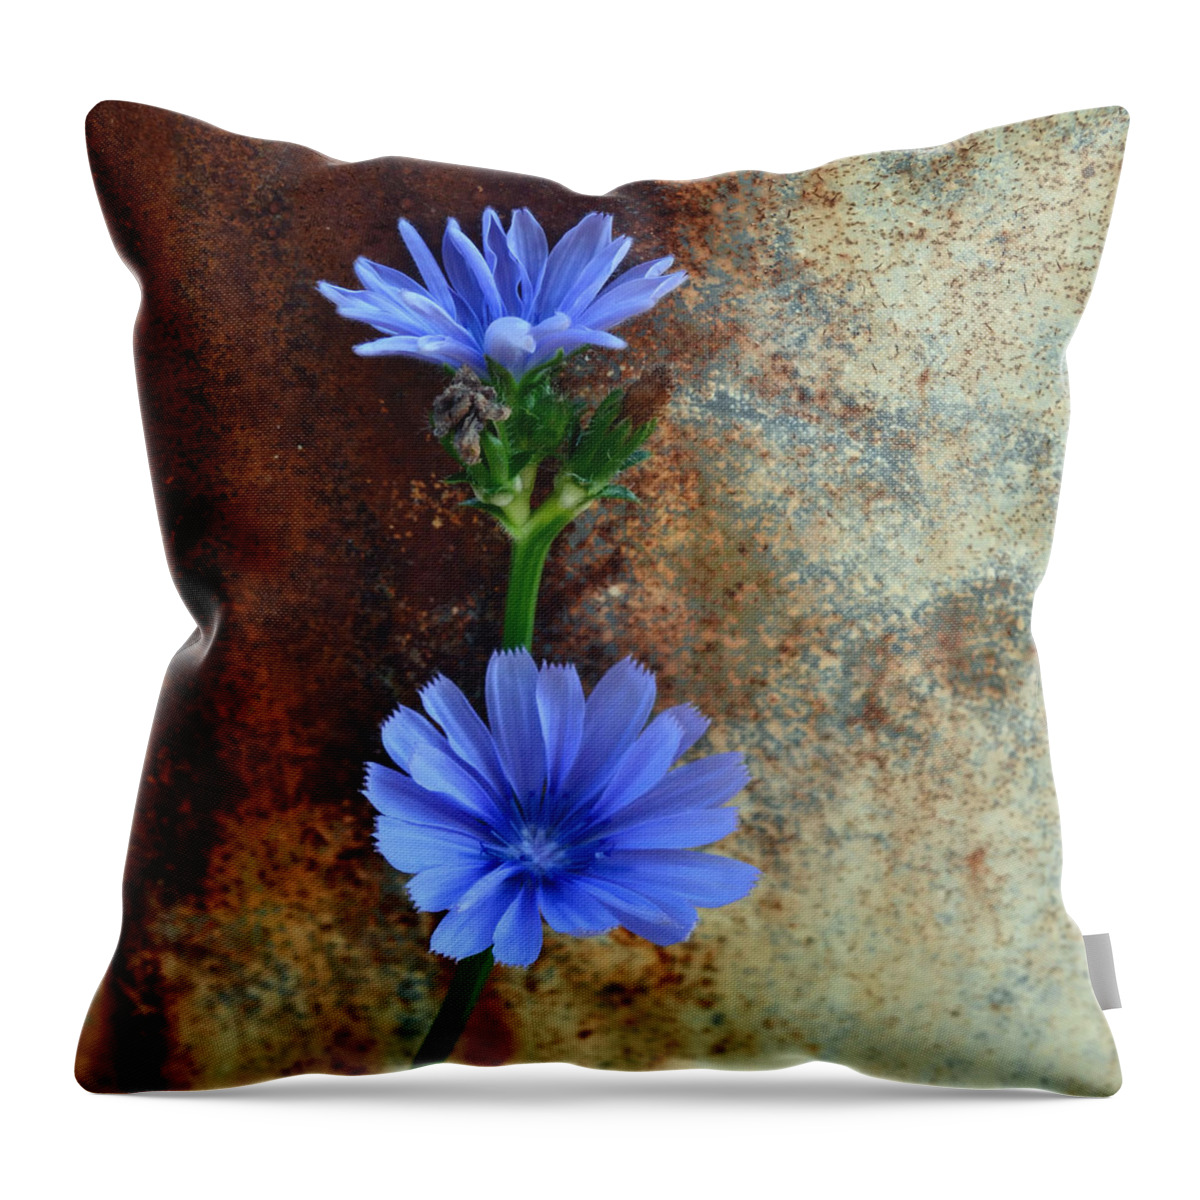 Rustic Bloom Throw Pillow featuring the photograph Rustic Bloom by Tom Druin